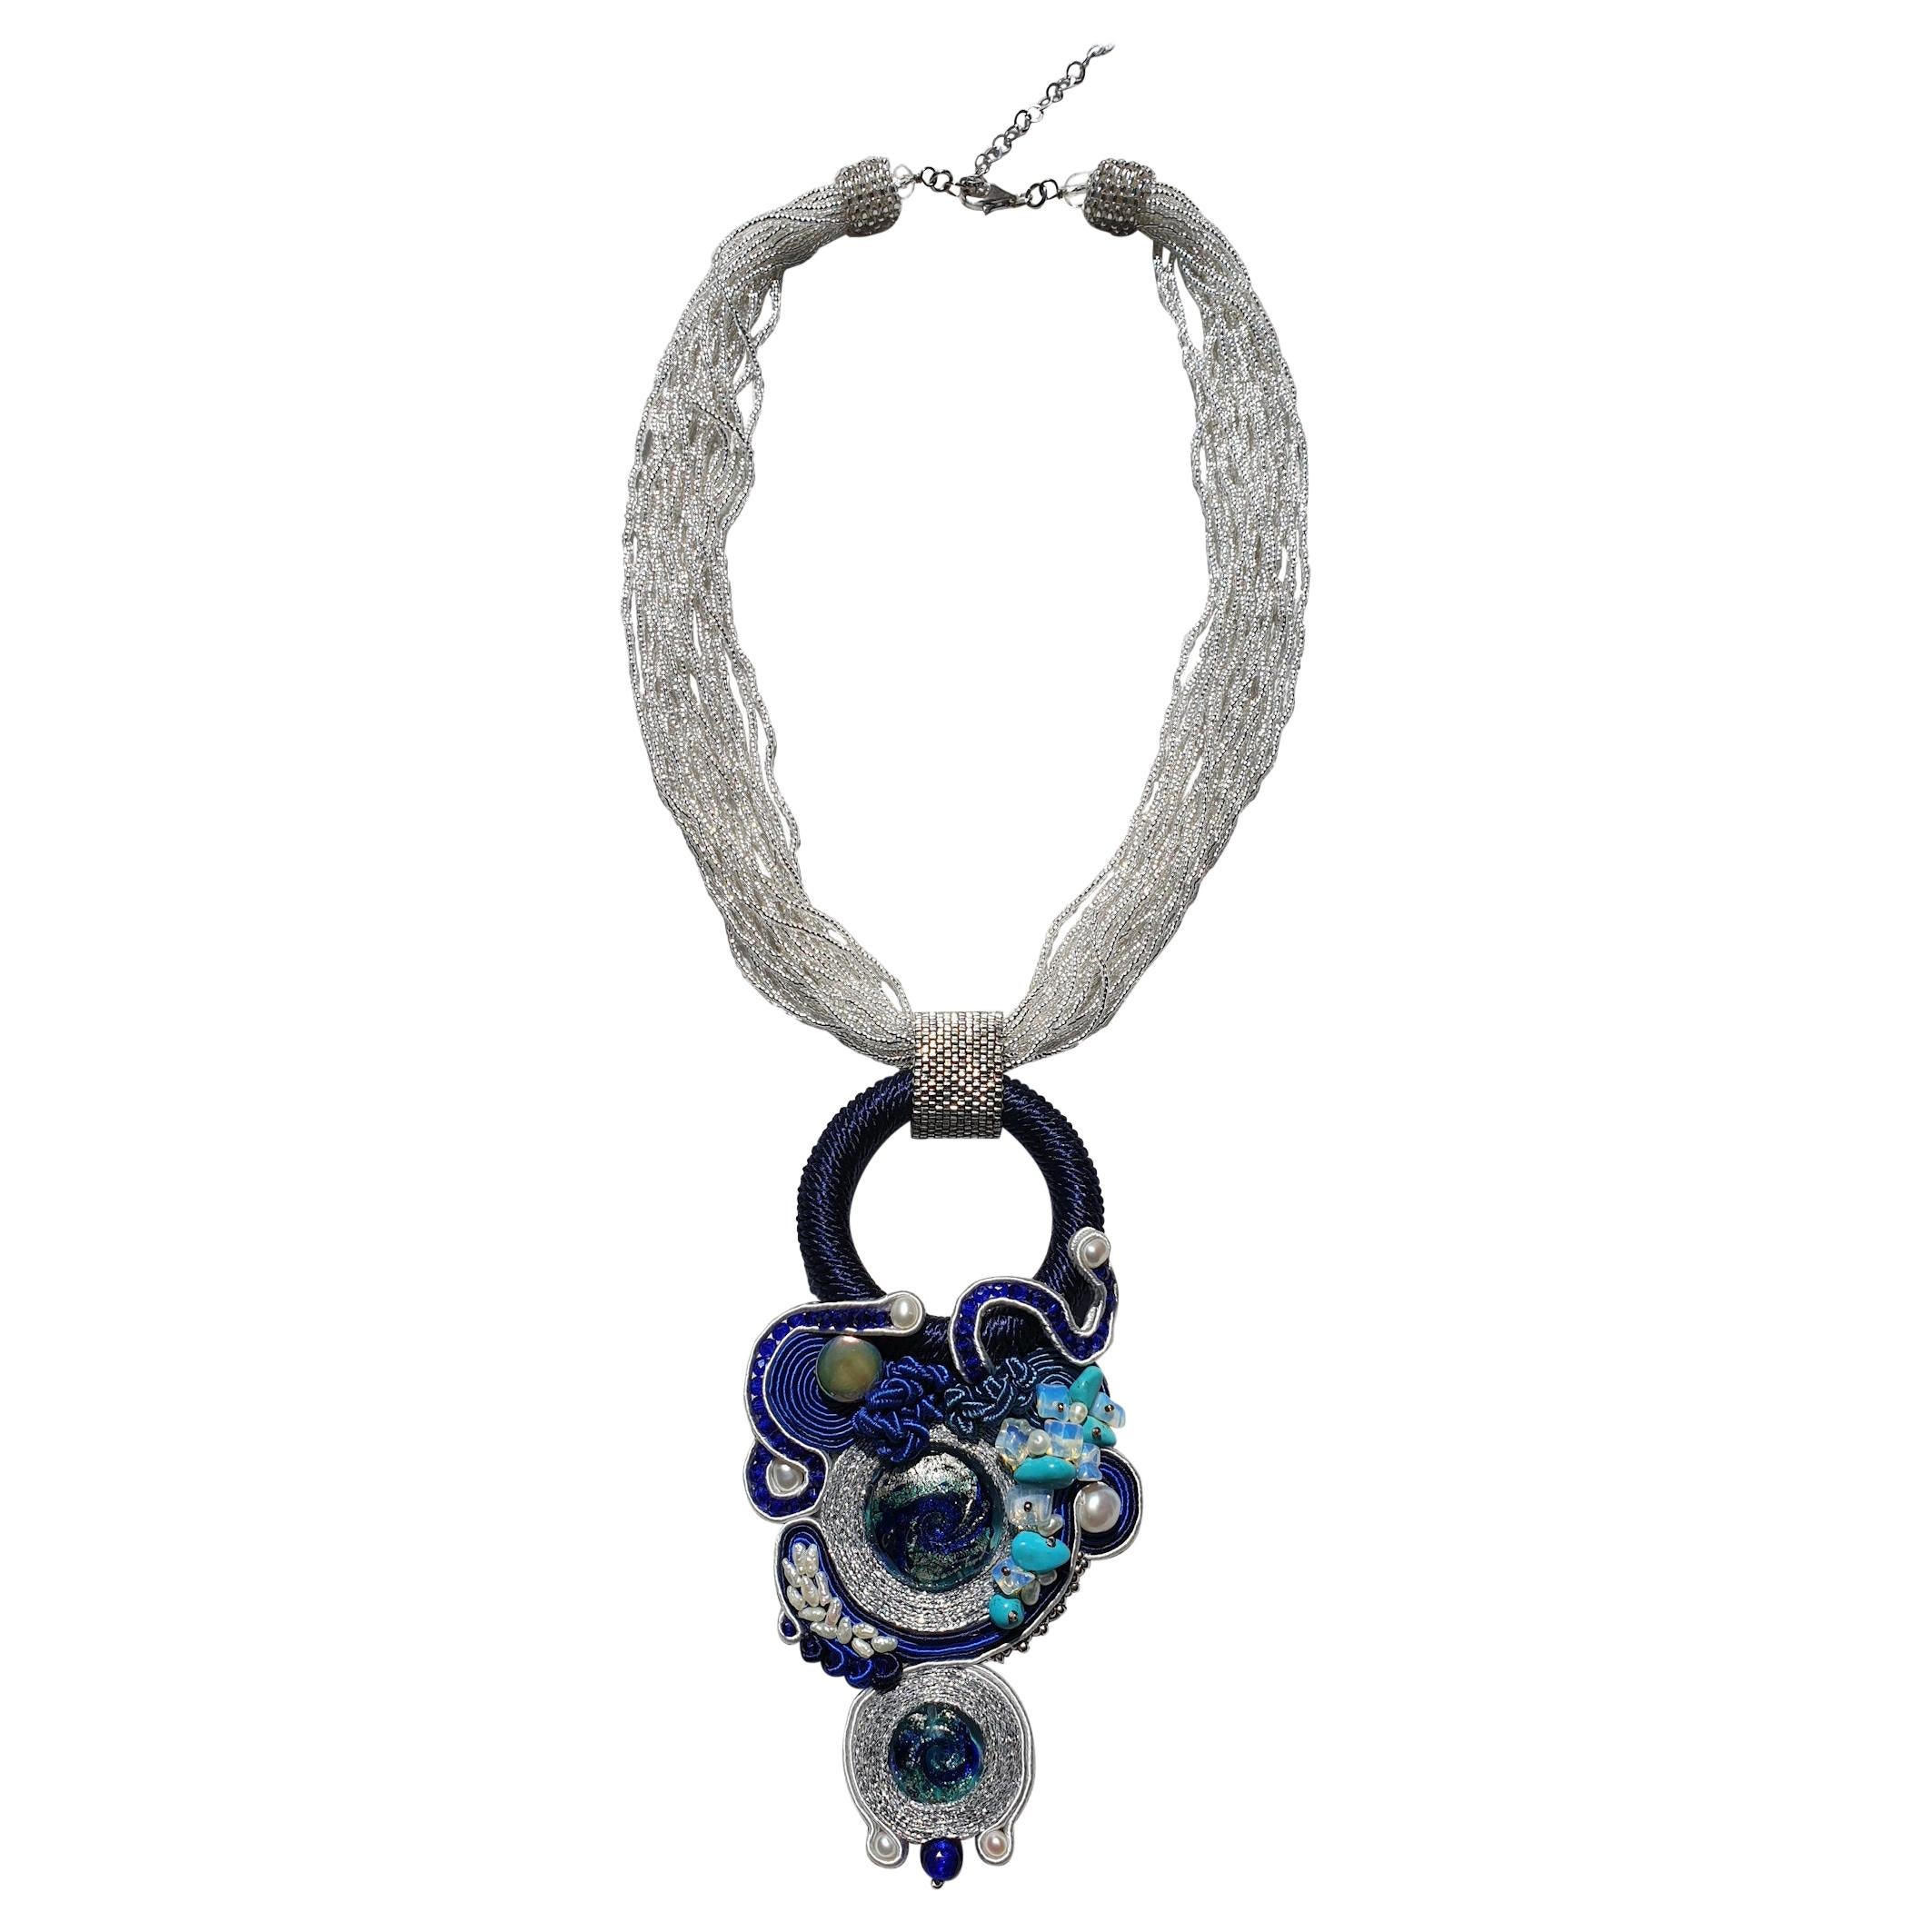 Unique Murano glass beads & fabric costume necklace by Venetian artist Paola B.